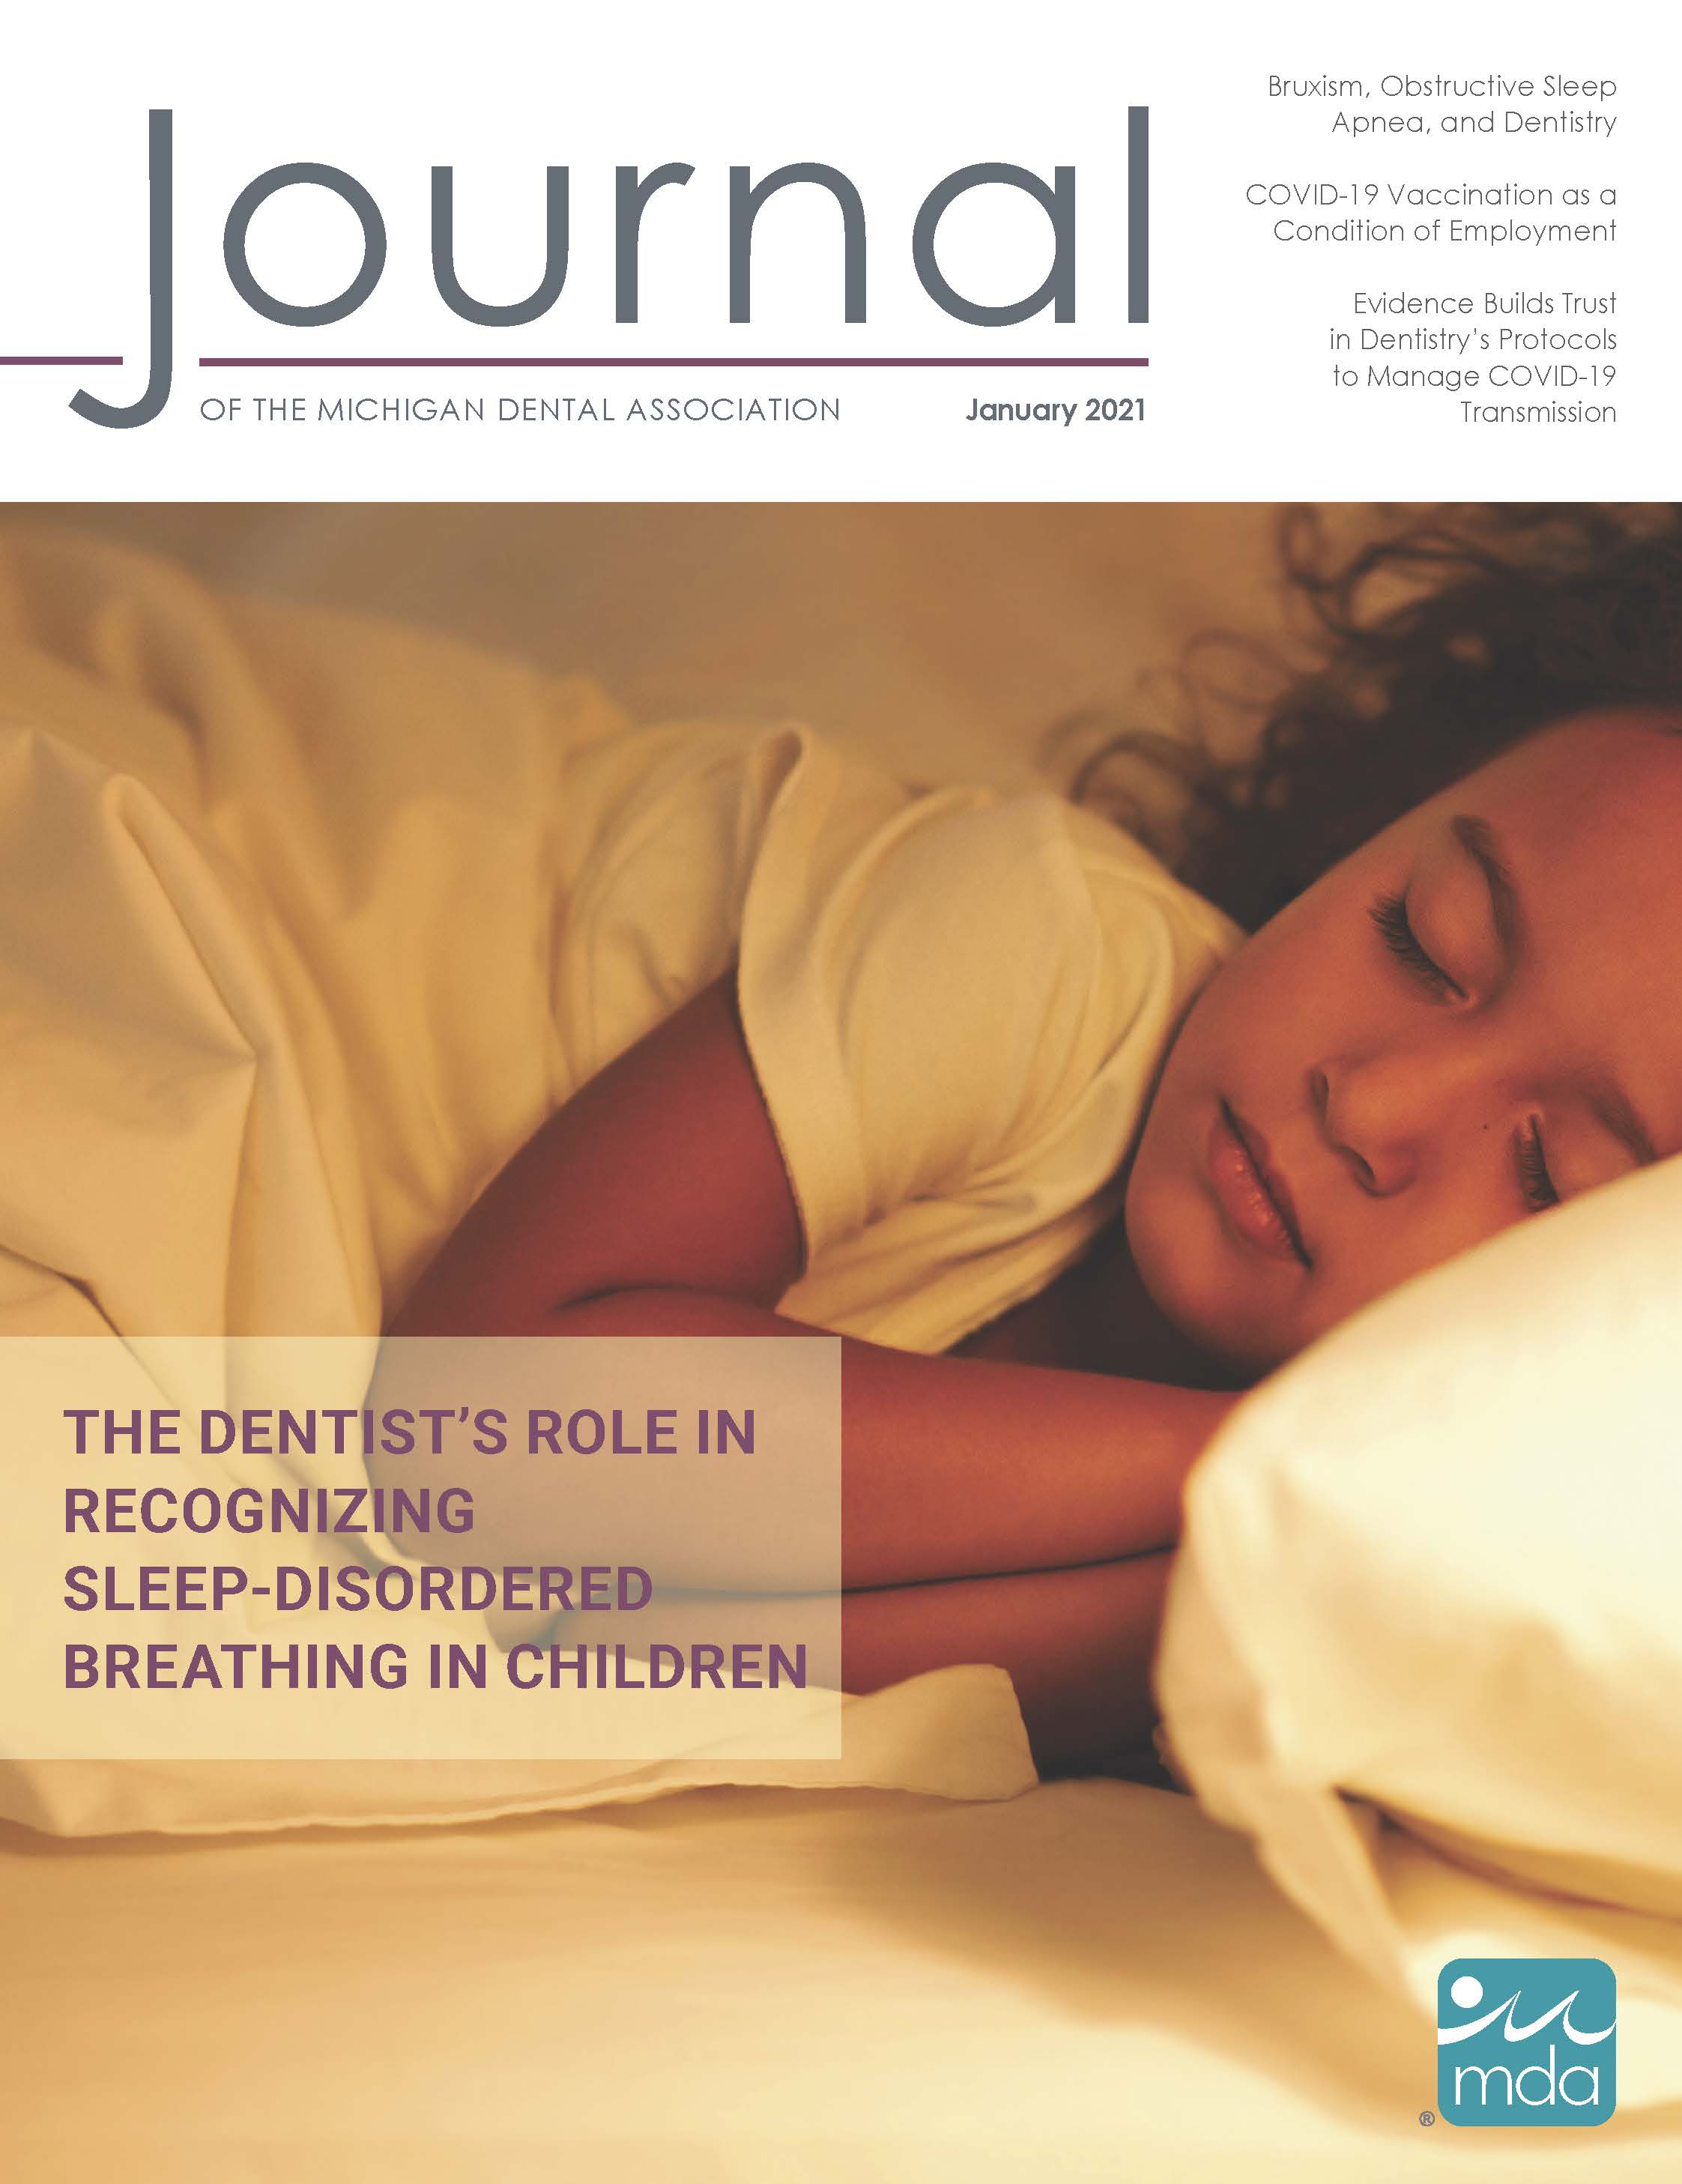 Cover of the Journal of the Michigan Dental Association with a sleeping child.